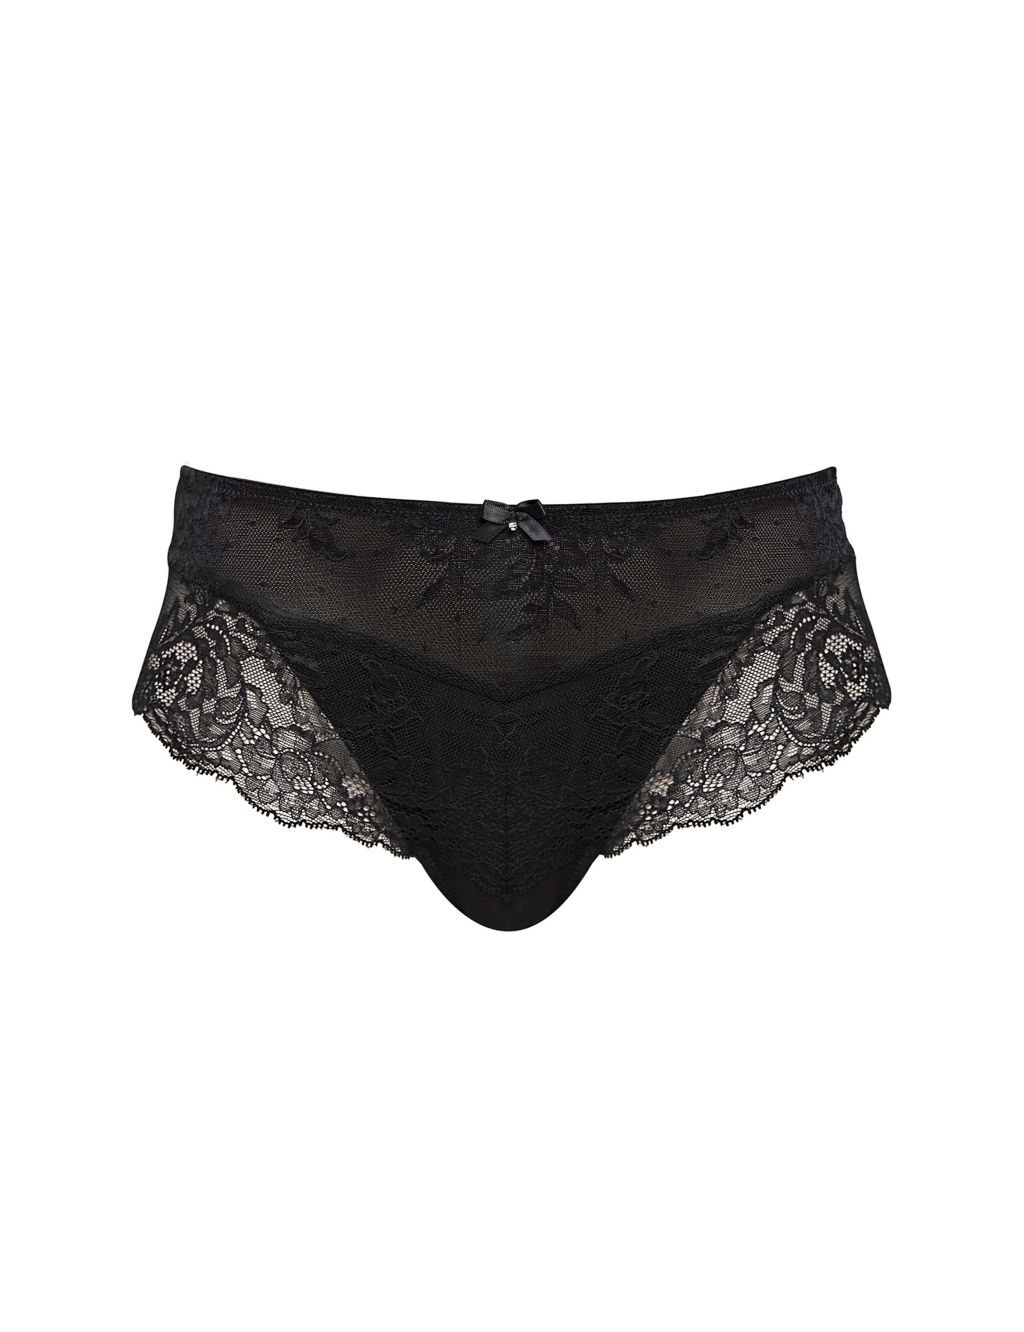 Ana Lace Low Rise Briefs image 2